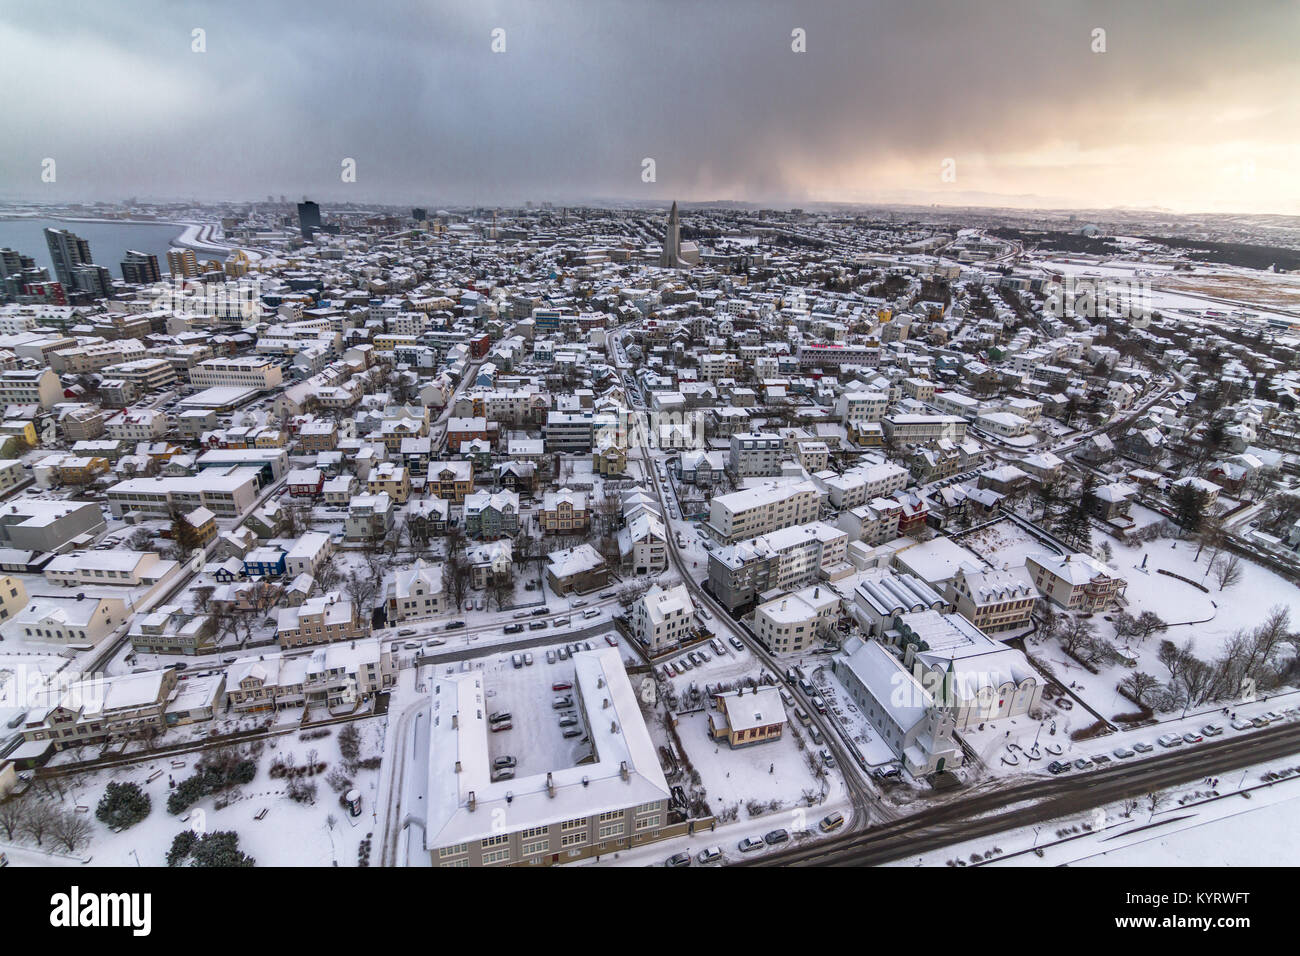 Reykjavík is the capital and largest city of Iceland. It has a latitude of 64°08' N, making it the world's northernmost capital of a sovereign state a Stock Photo